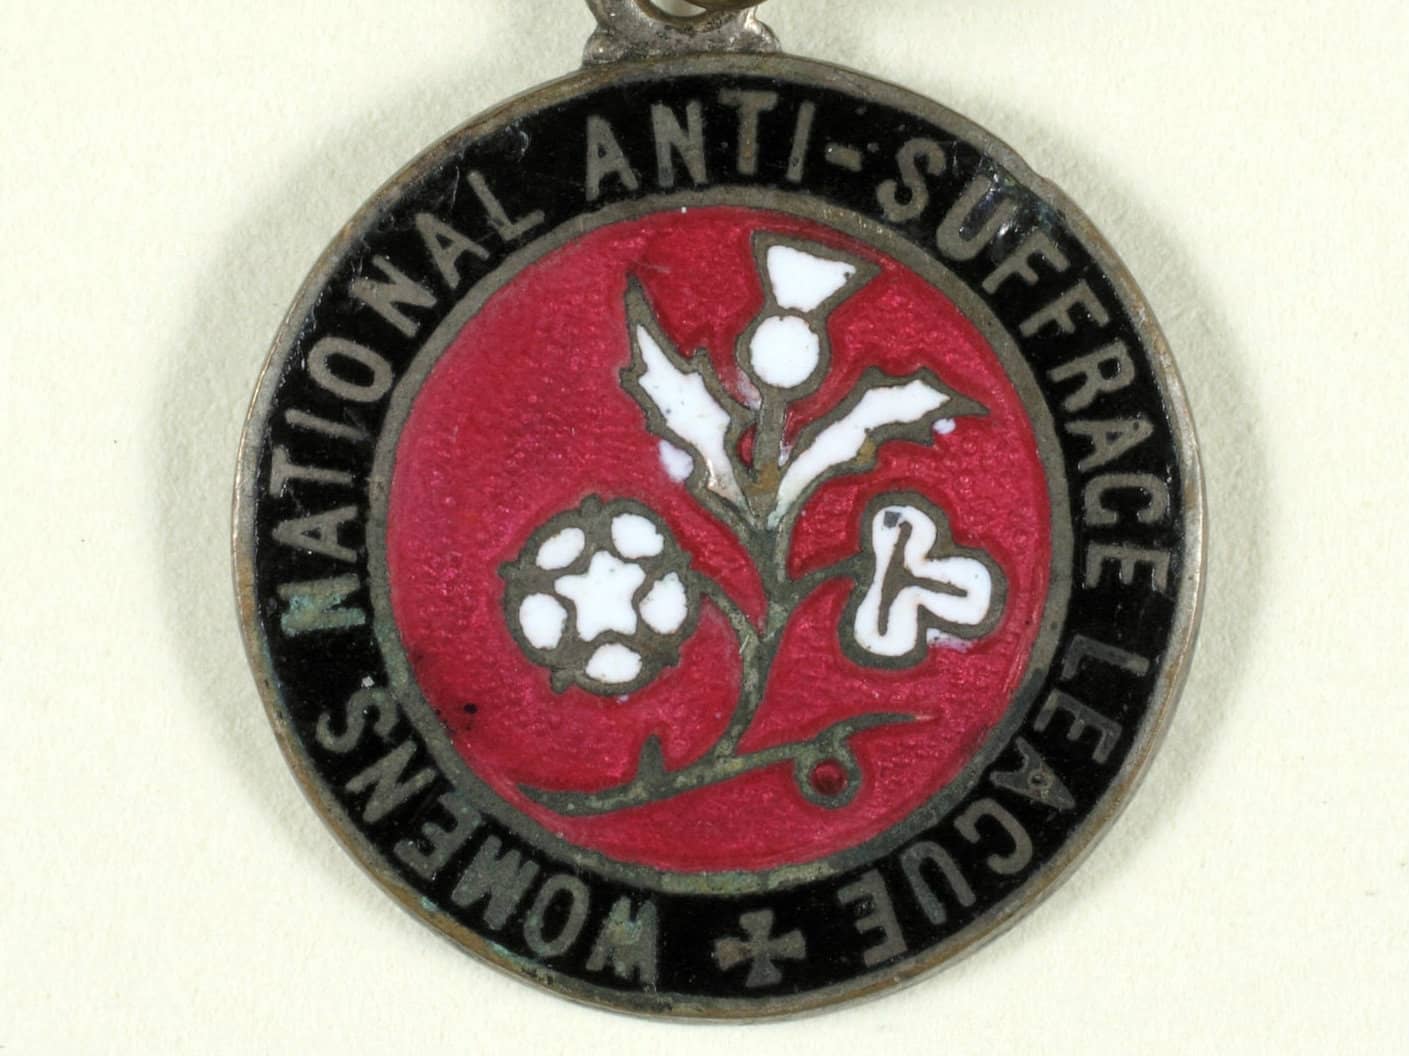 An anti-suffrage movement badge